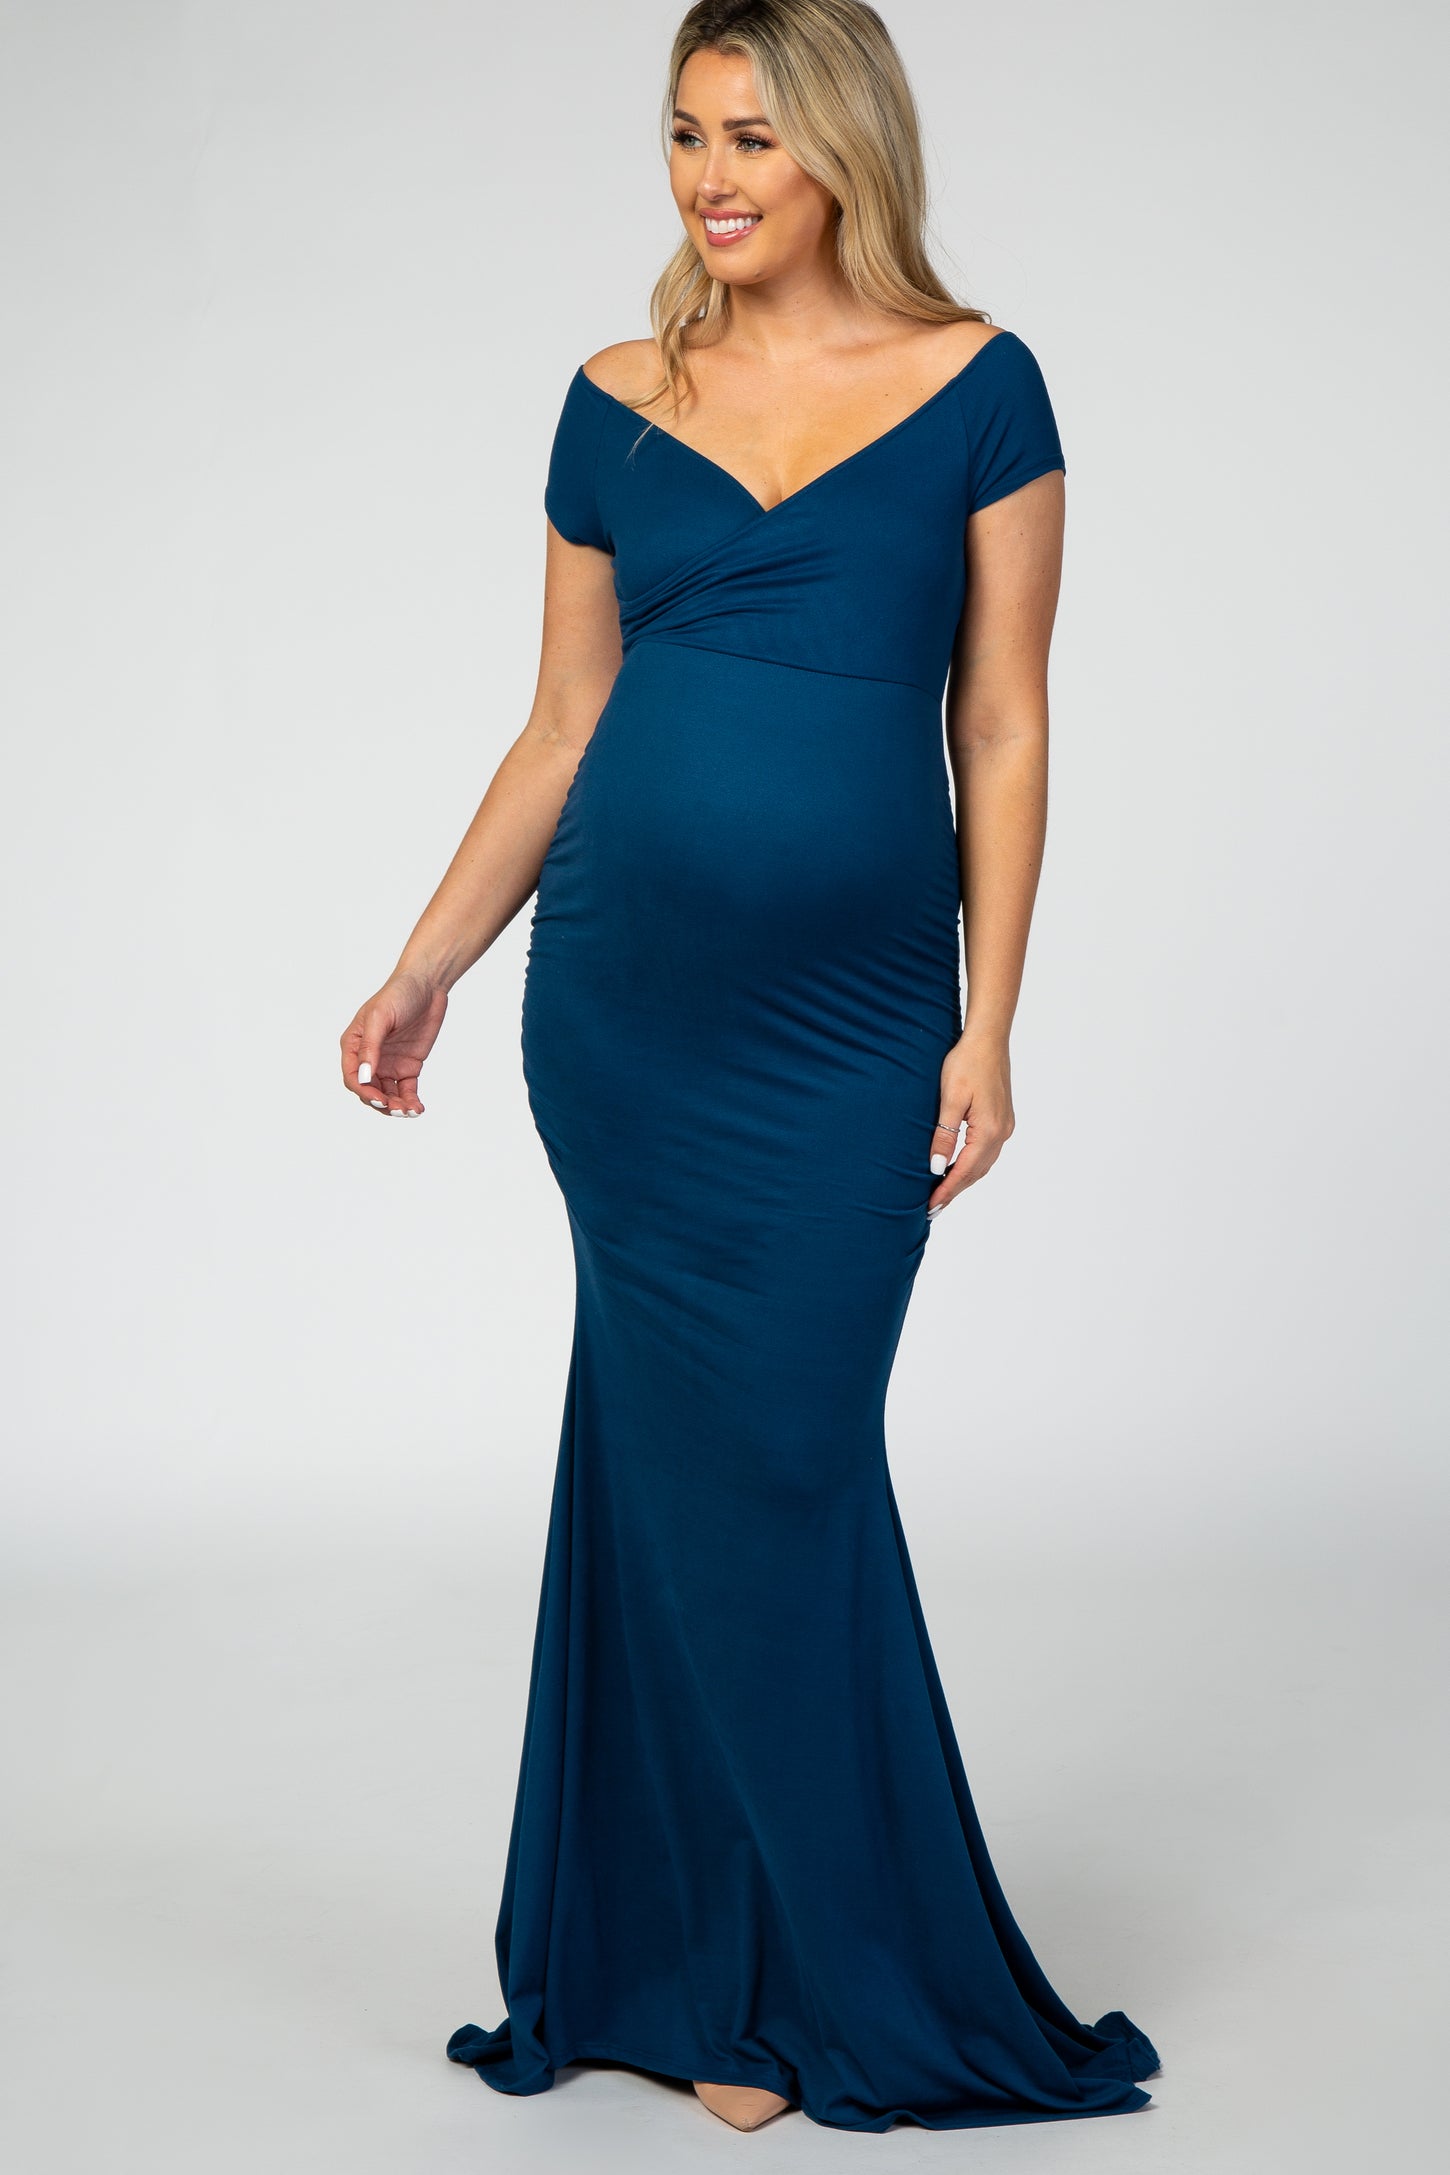 Dark Teal Off Shoulder Wrap Maternity Photoshoot Gown/Dress